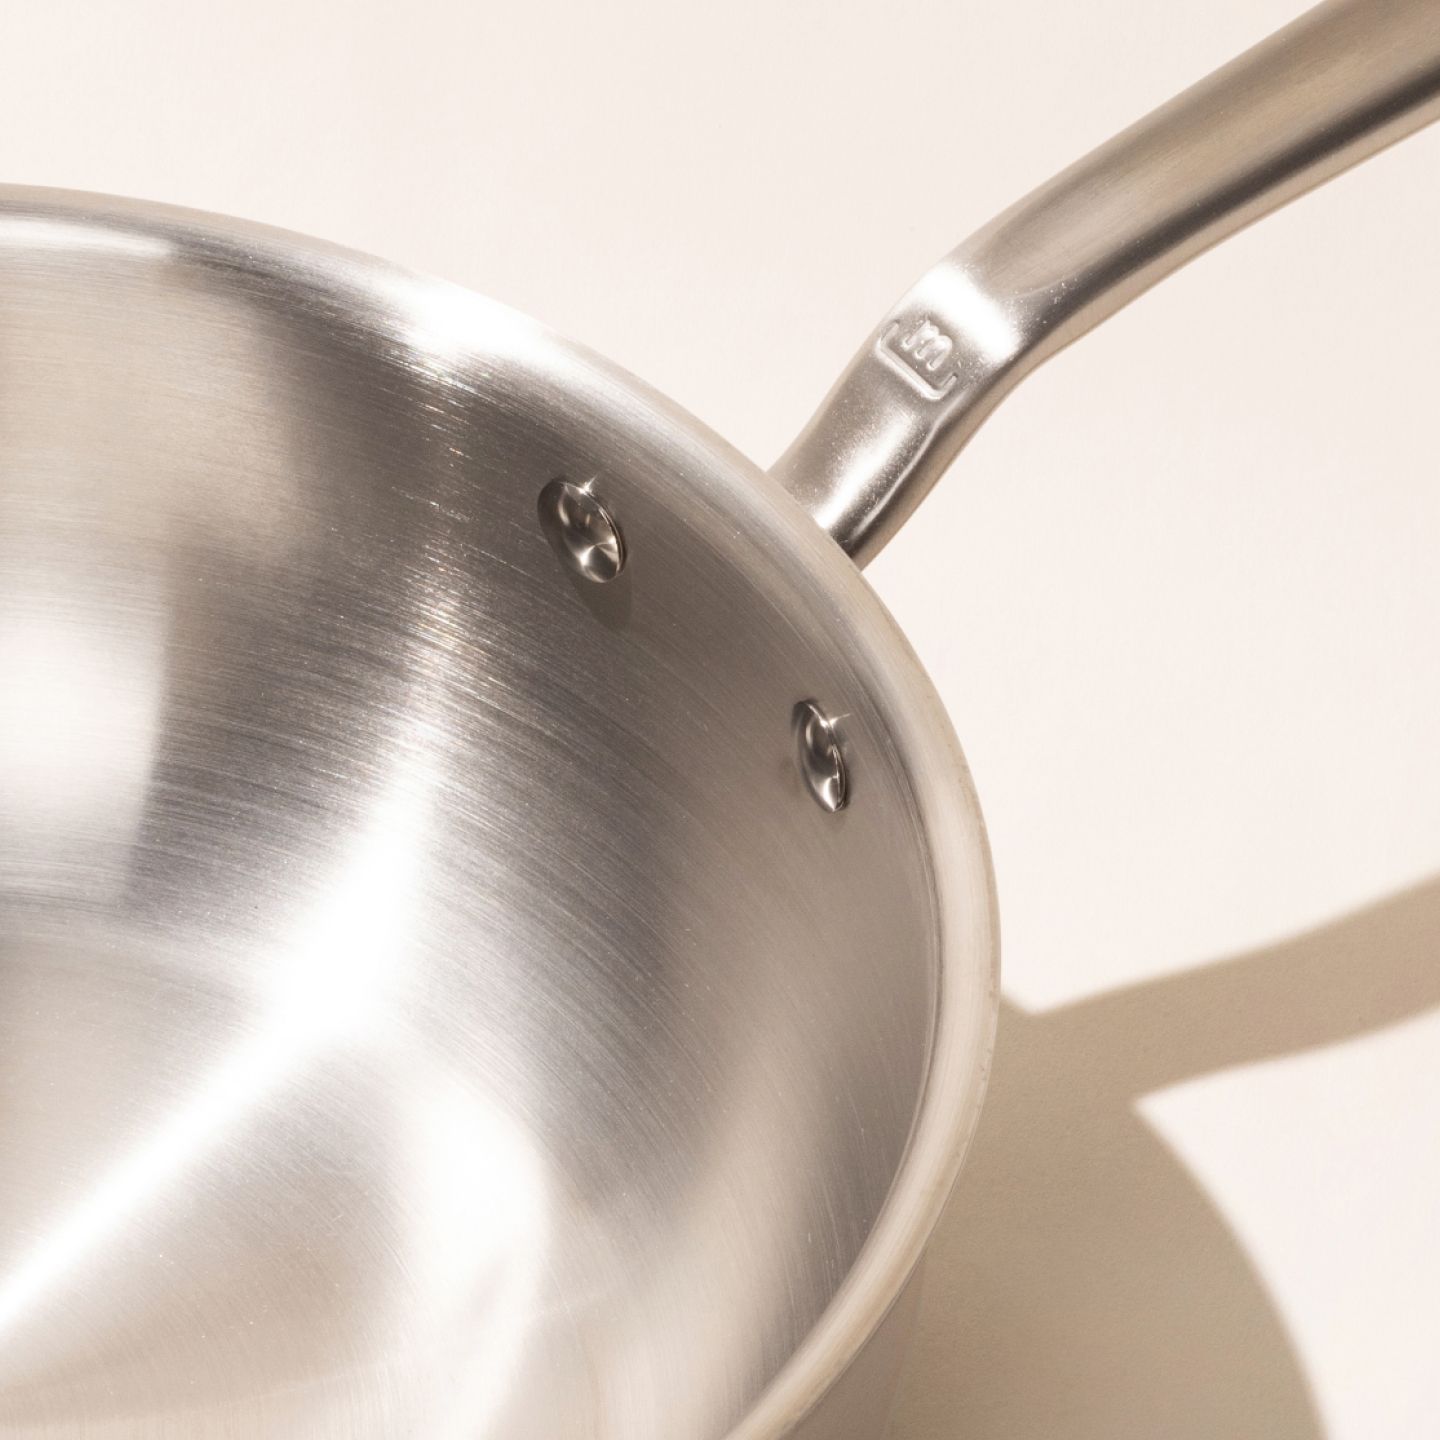 Misen: Save 40% on our bestselling Stainless Steel Saucier